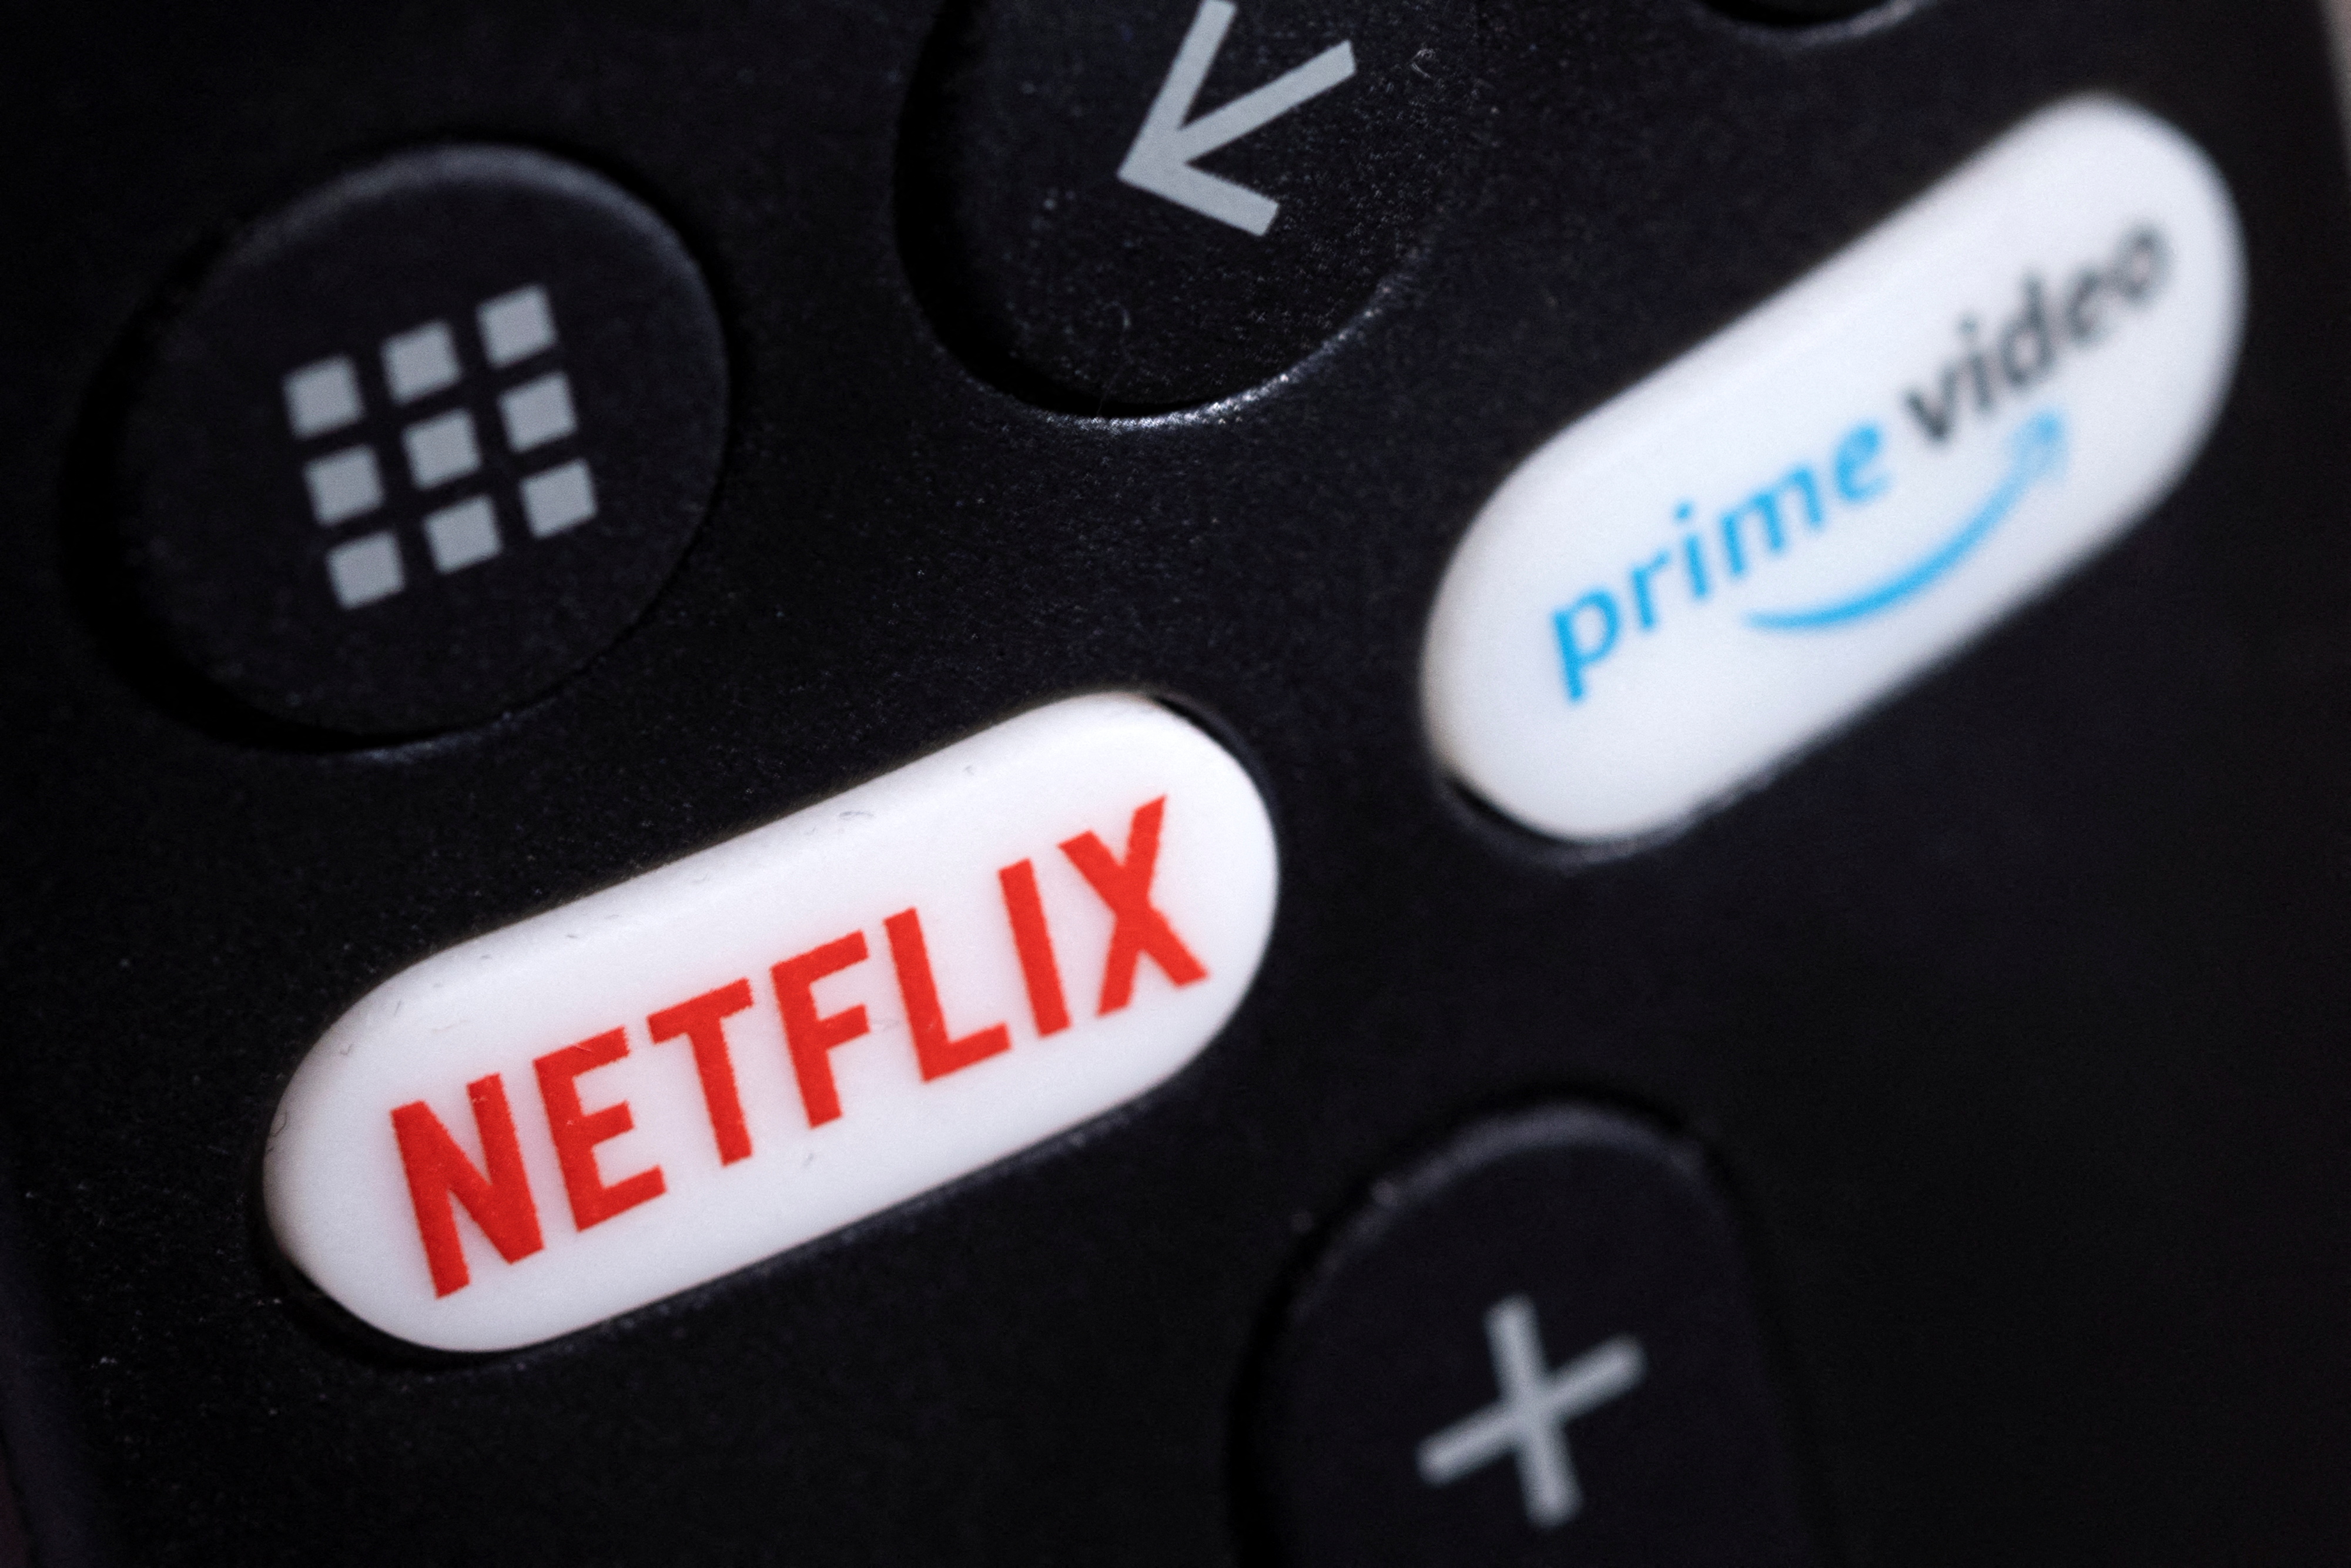 Netflix and Prime video logos are seen on a TV remote controller in this illustration